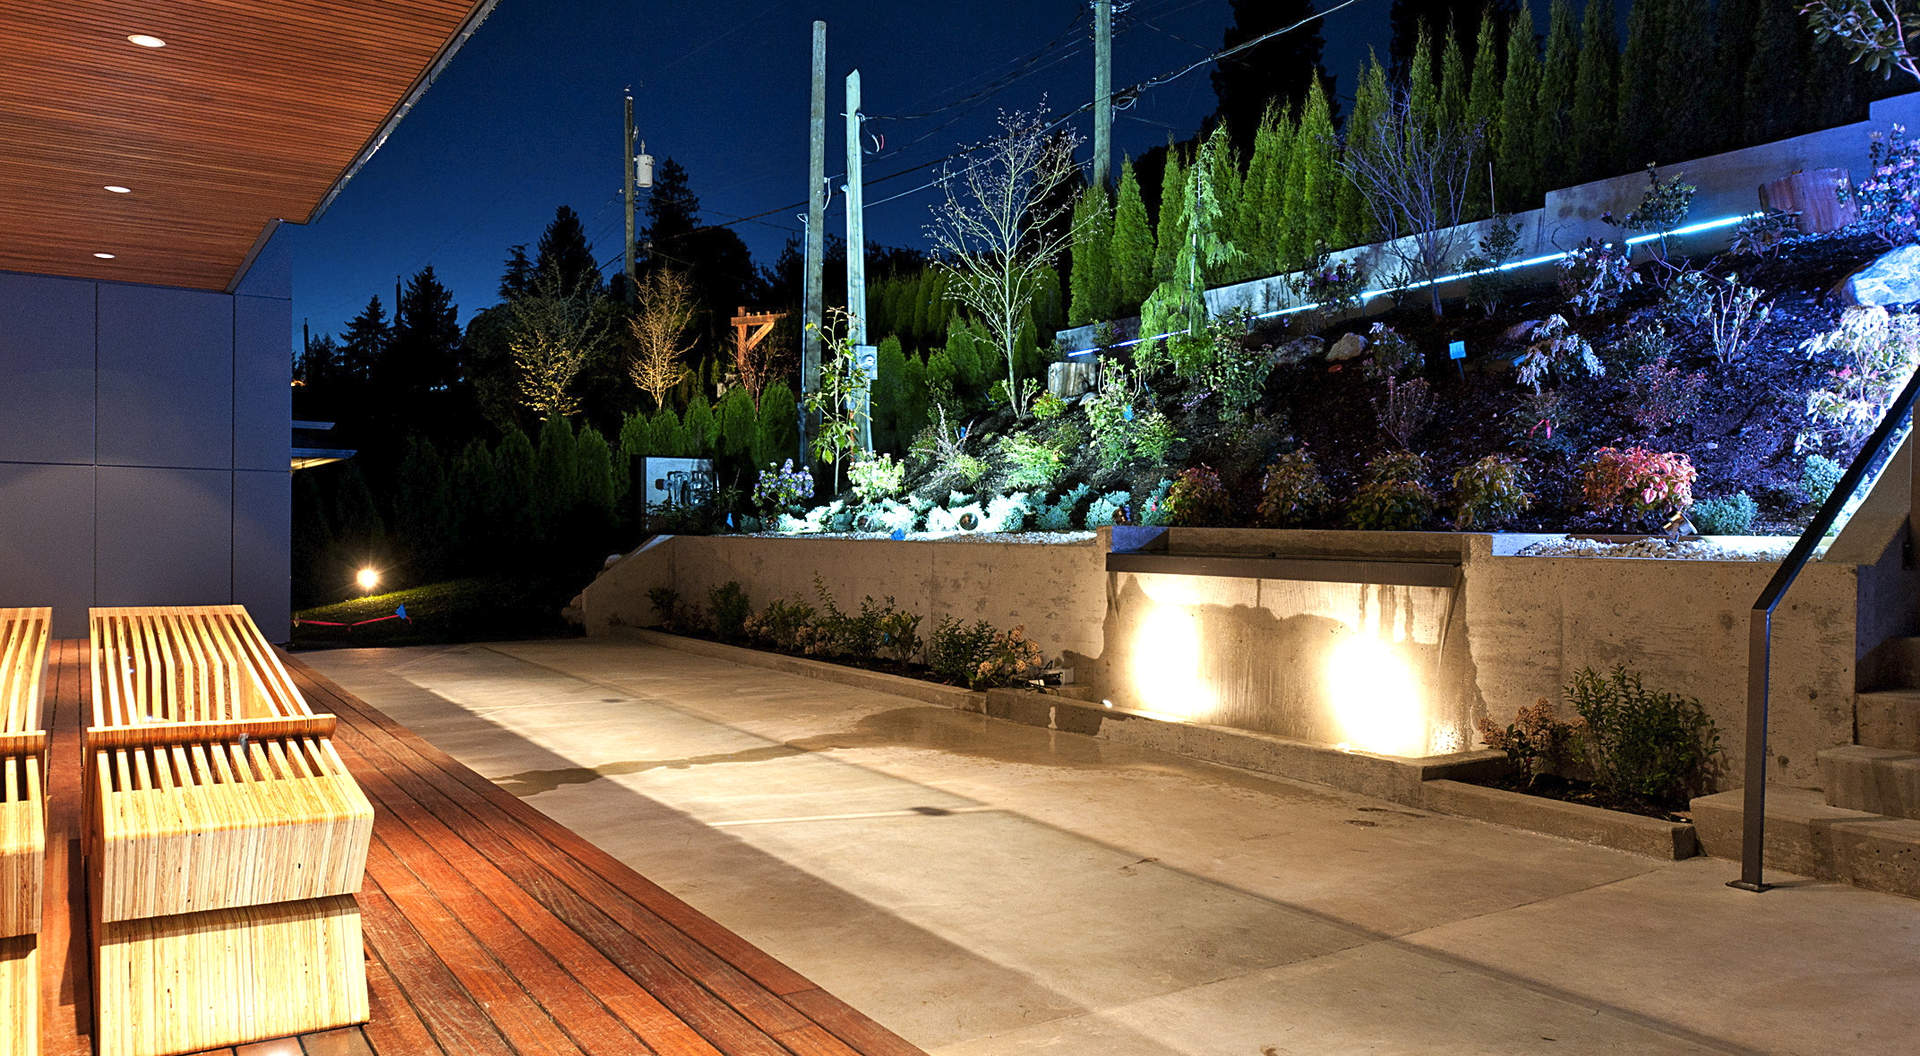 Stunning Gardens with Full Irrigation & Illumination Through-out